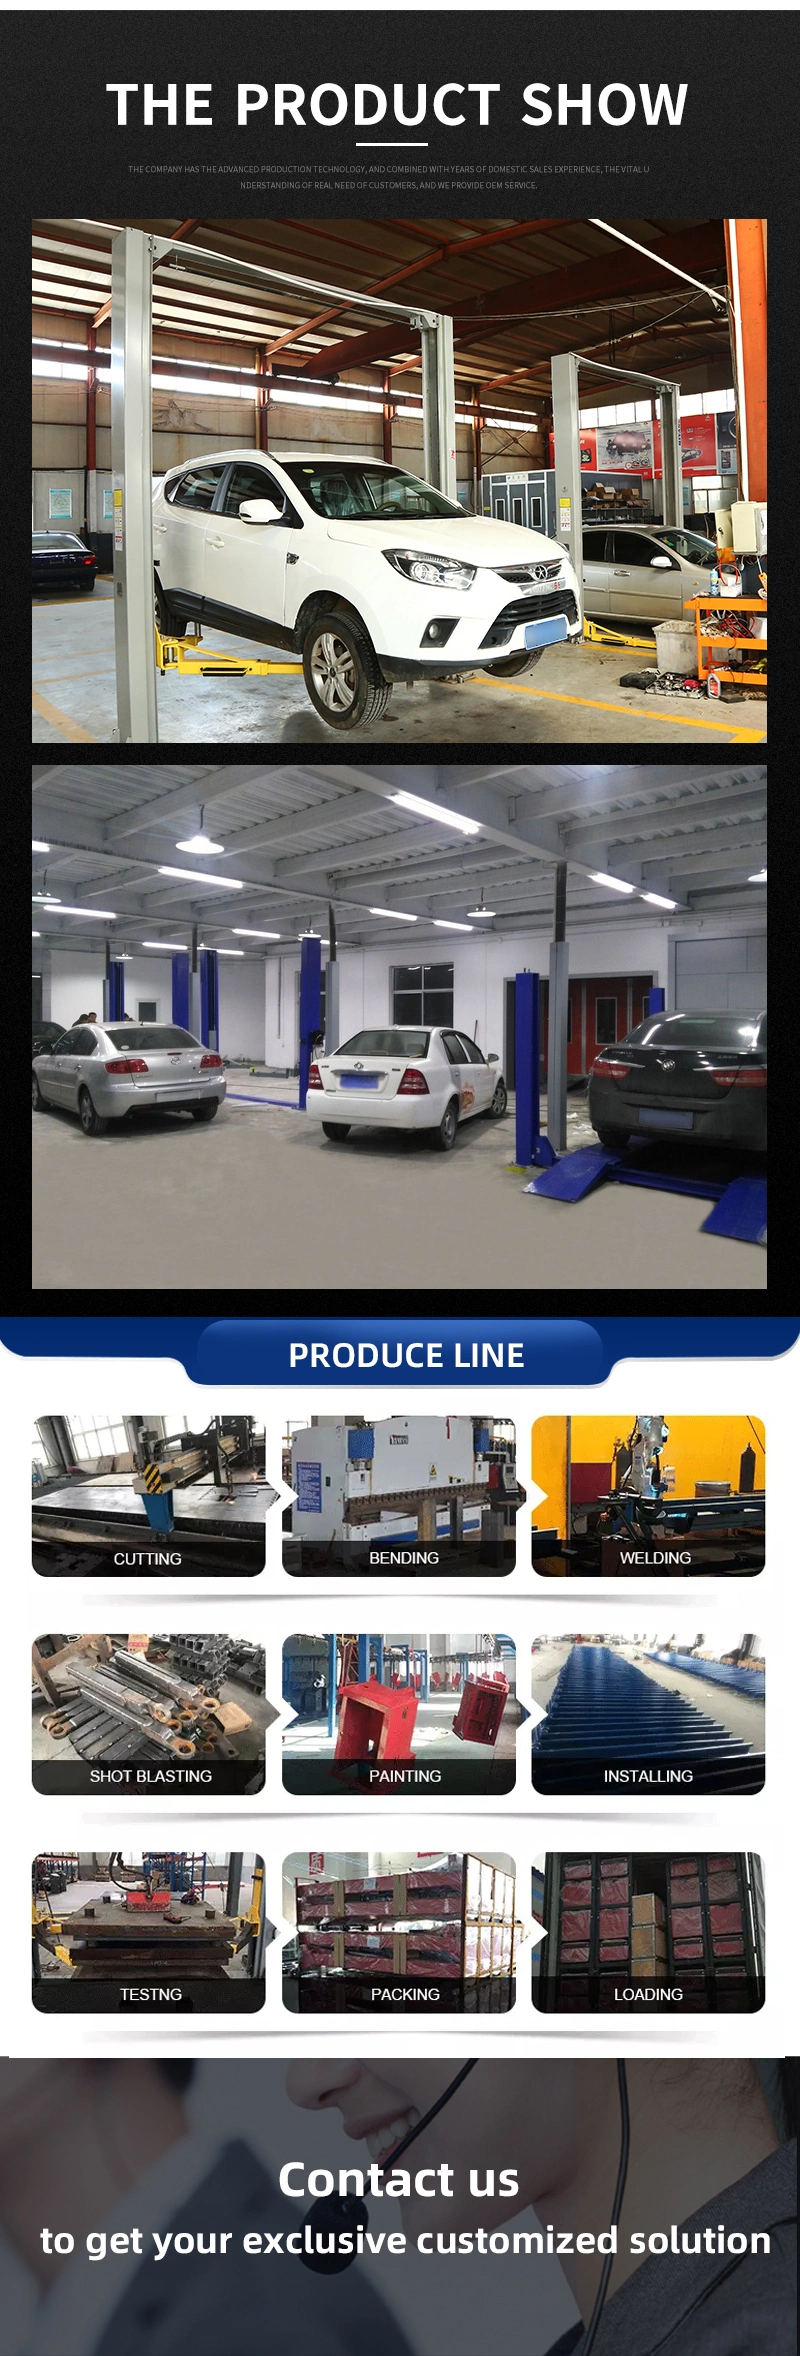 4 Column Residential Outdoor Hydraulic Portable Home Auto Stacker System Garage Car Lift for Home Garage